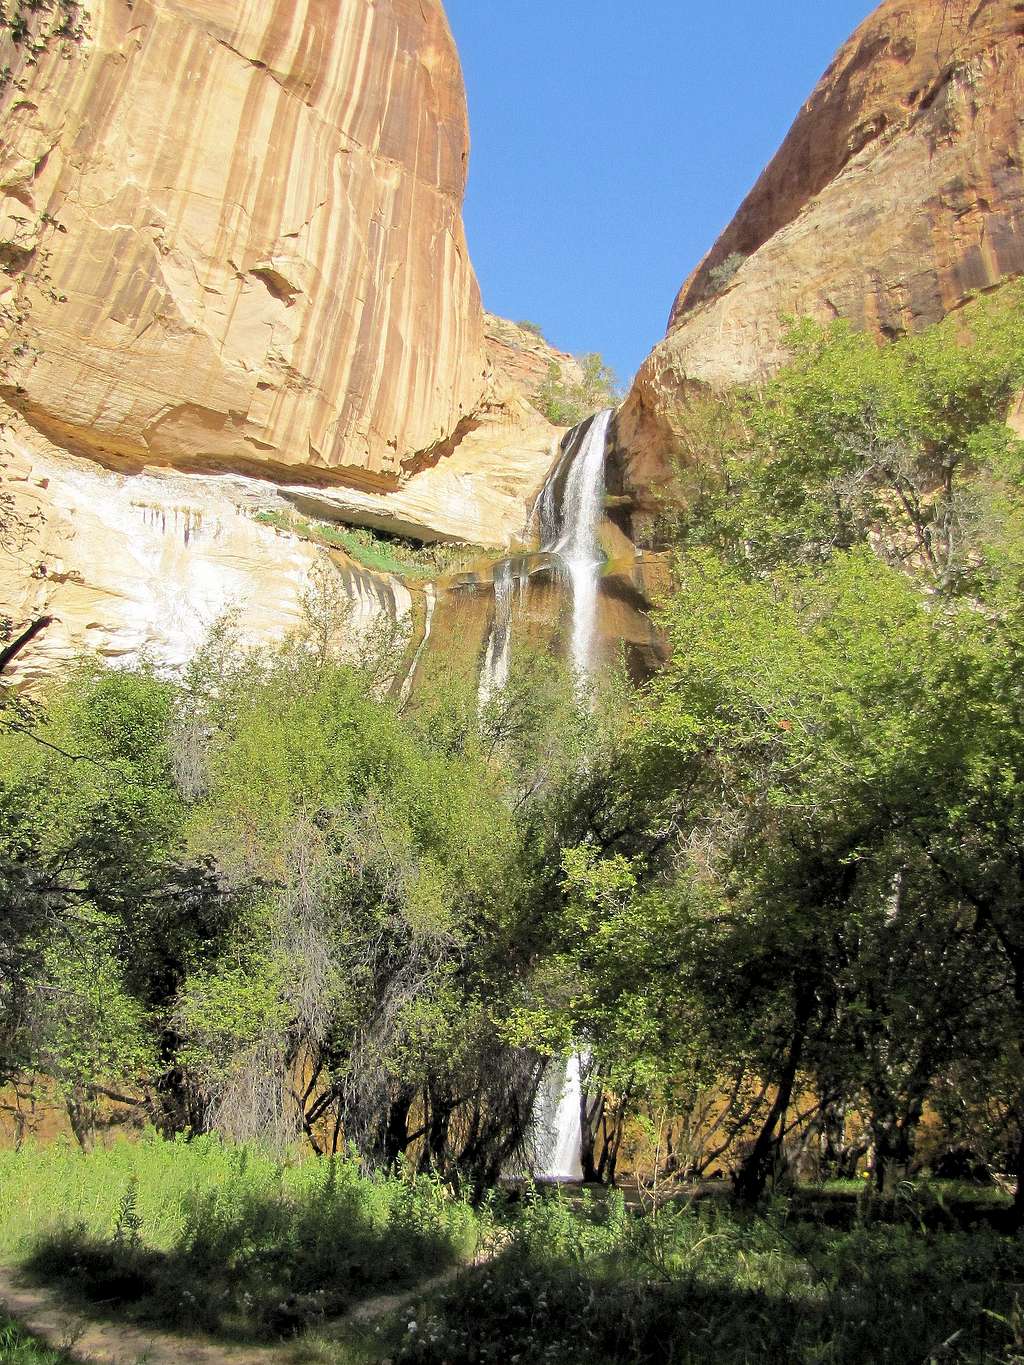 First view of Lower Calf Creek Falls